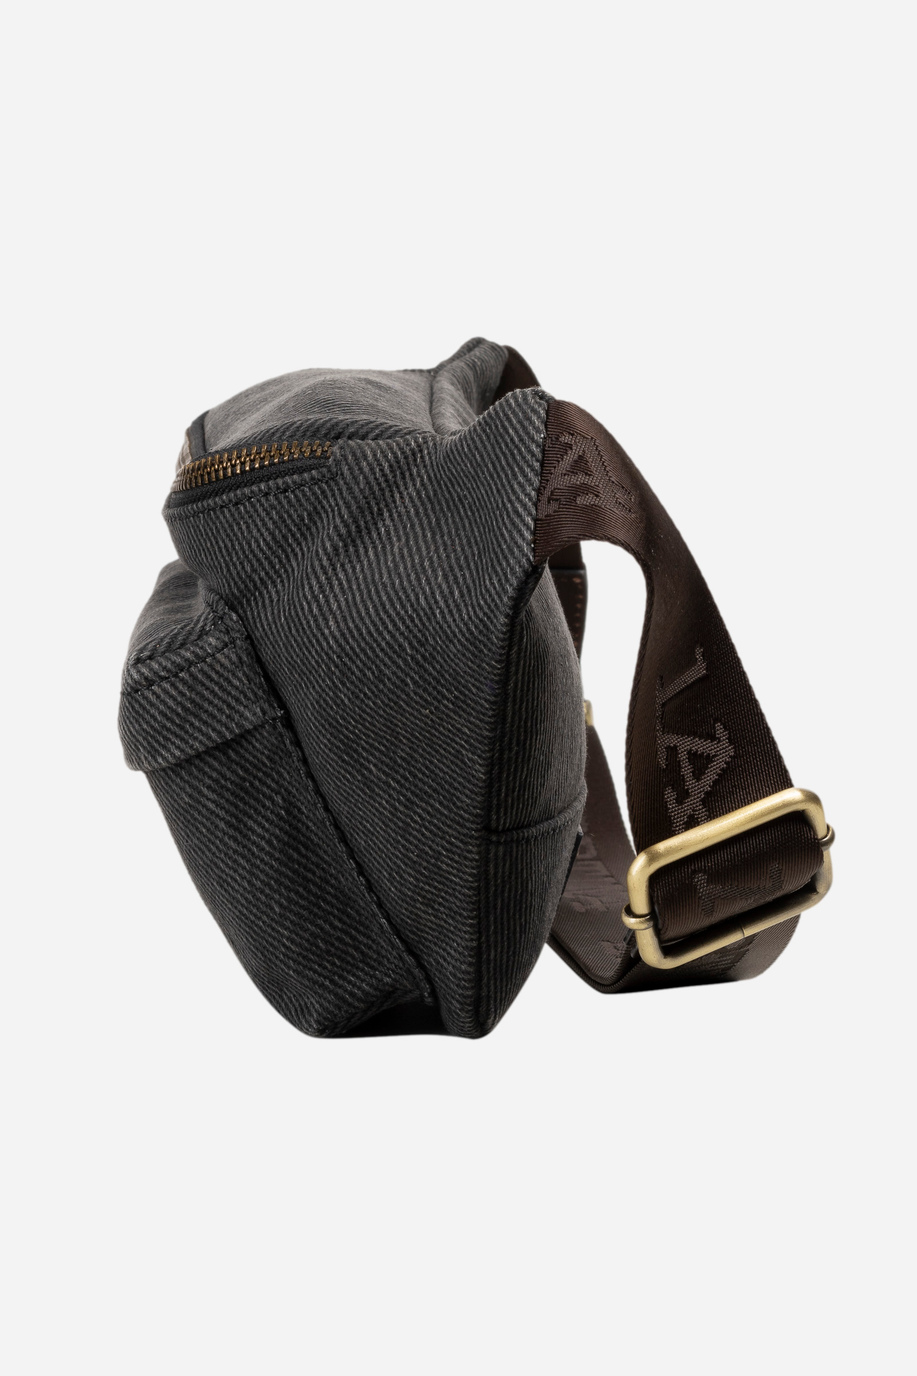 Men's bumbag in cotton and leather - Ivan - Bags | La Martina - Official Online Shop